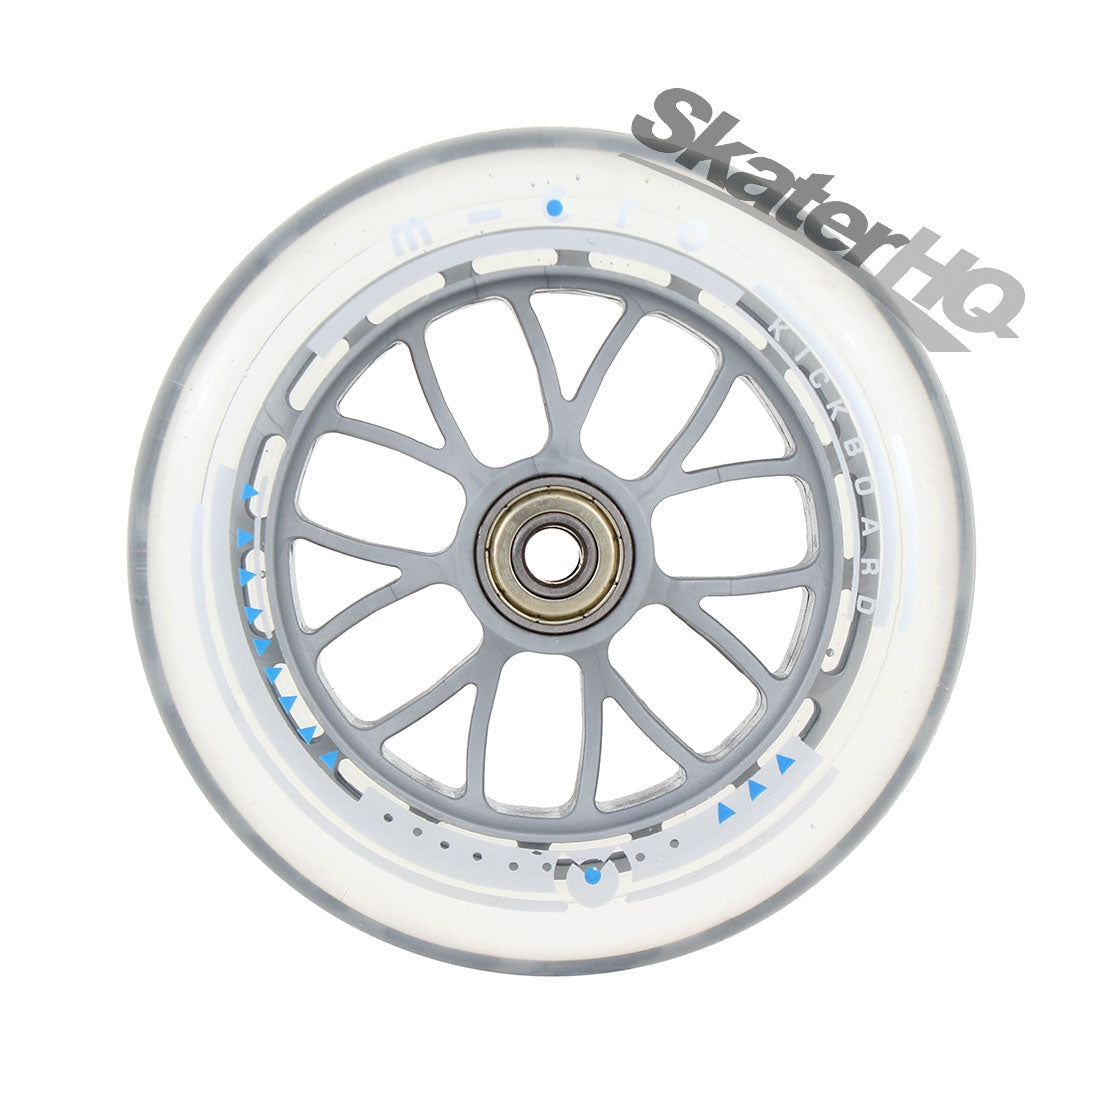 Micro 120mm Wheel - Clear Scooter Wheels